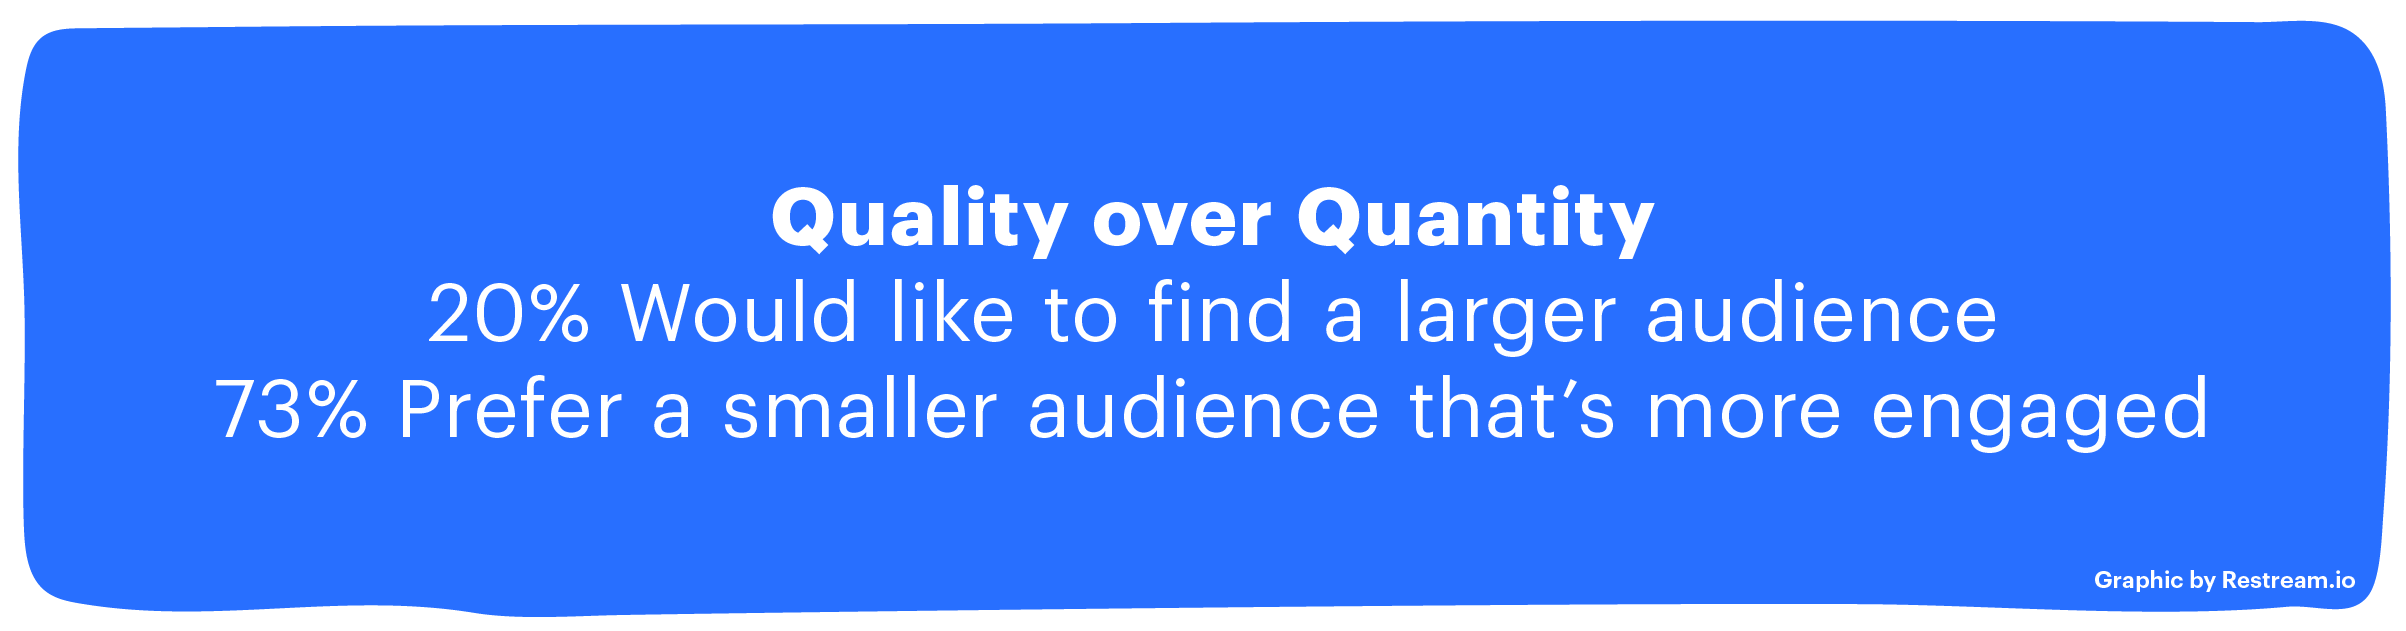 Quality over quantity in live streaming